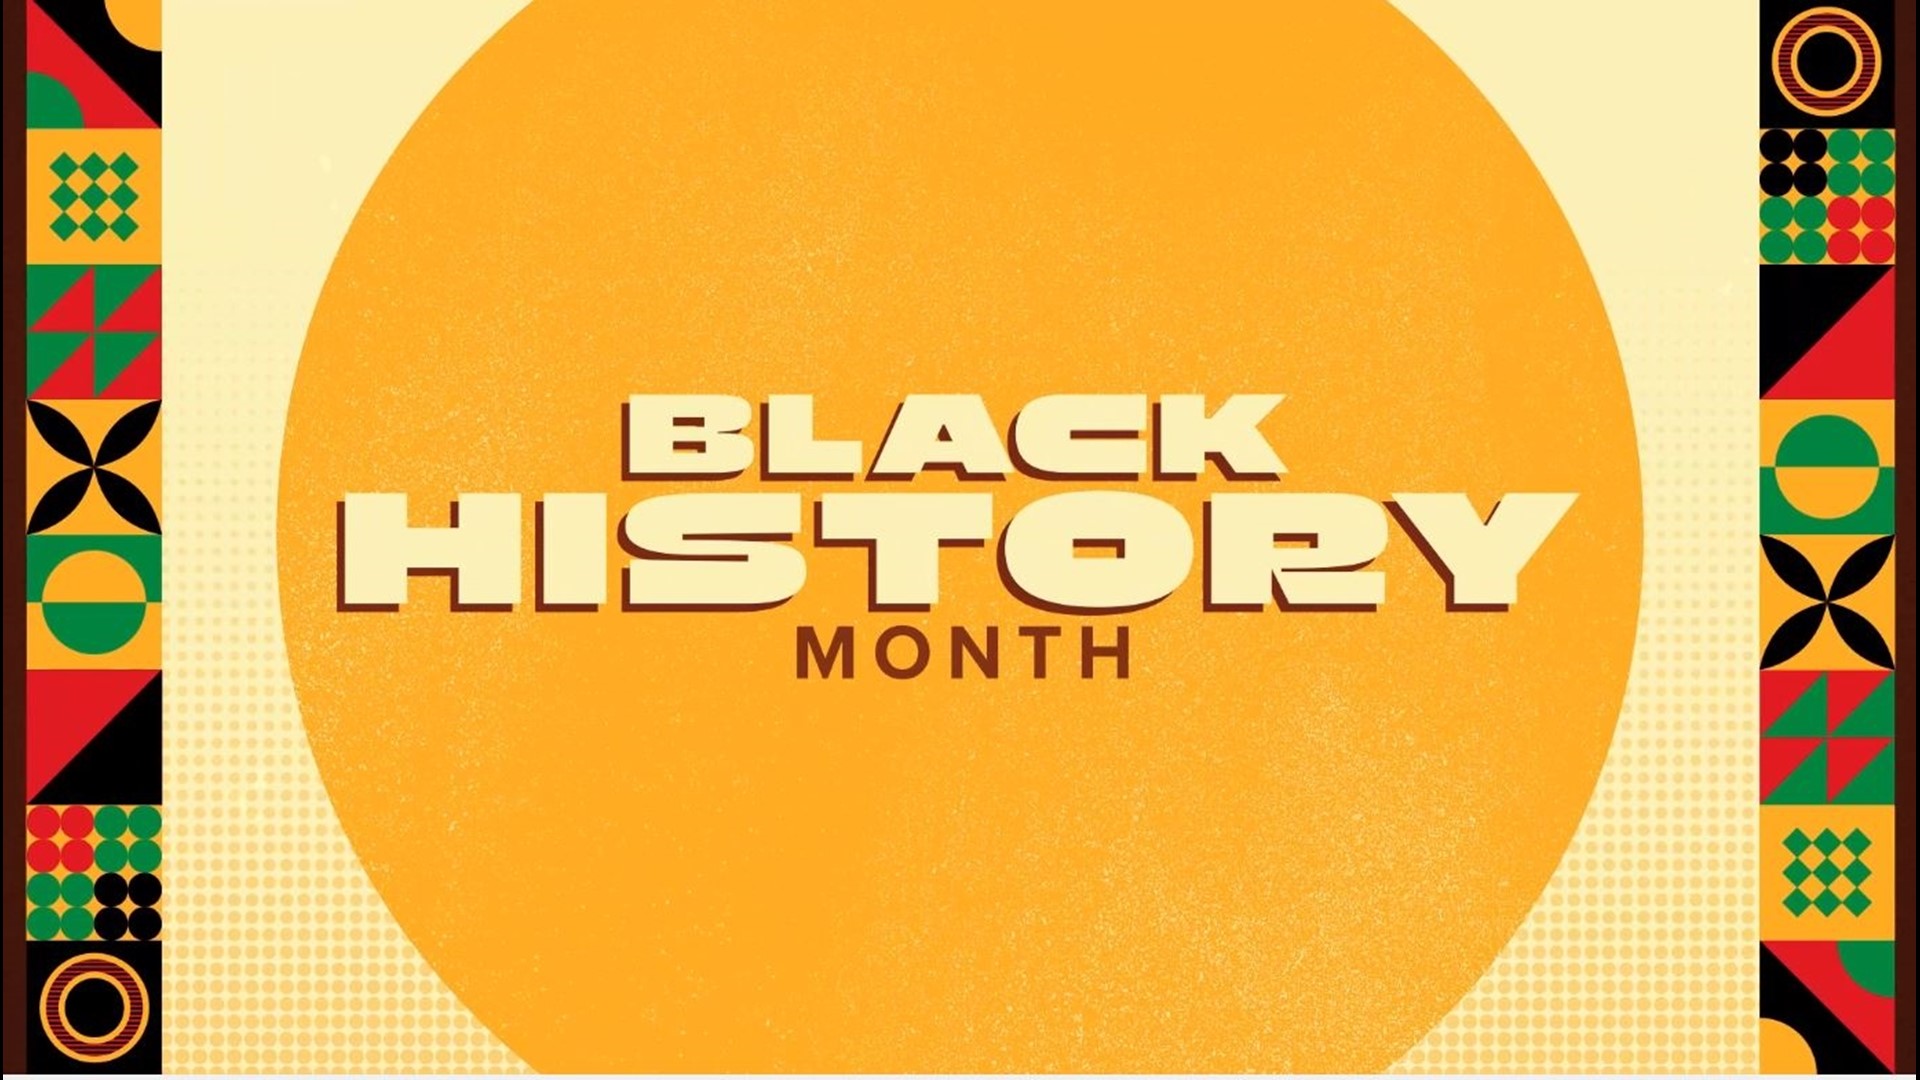 A look back at the history and origin of Black History Month, as well as the importance of celebrating. Plus, see how Black Americans have impacted the world.